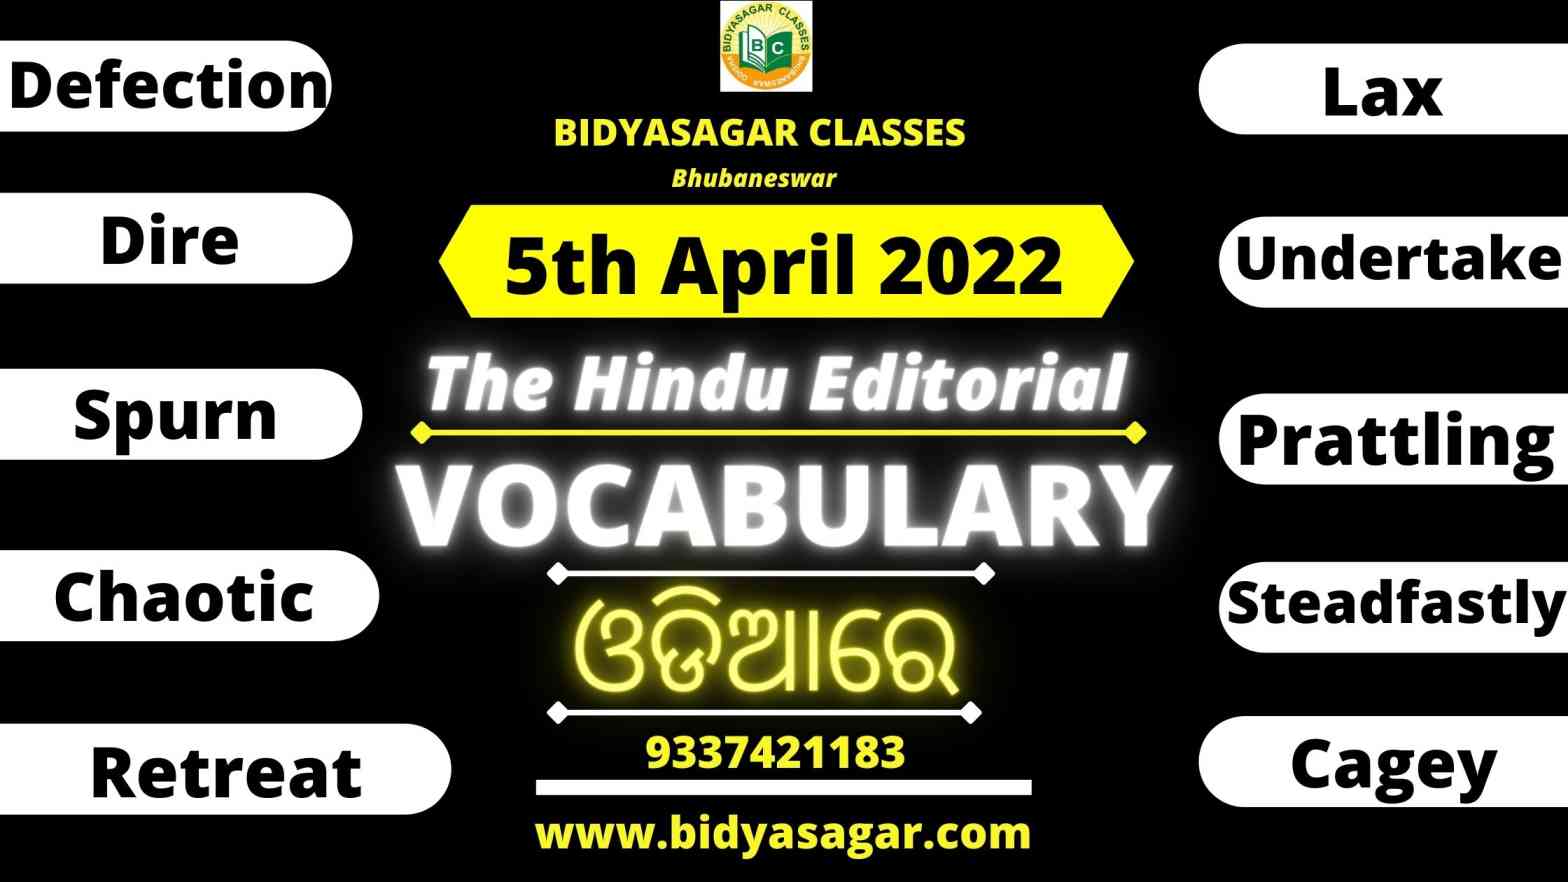 The Hindu Editorial Vocabulary of 5th April 2022